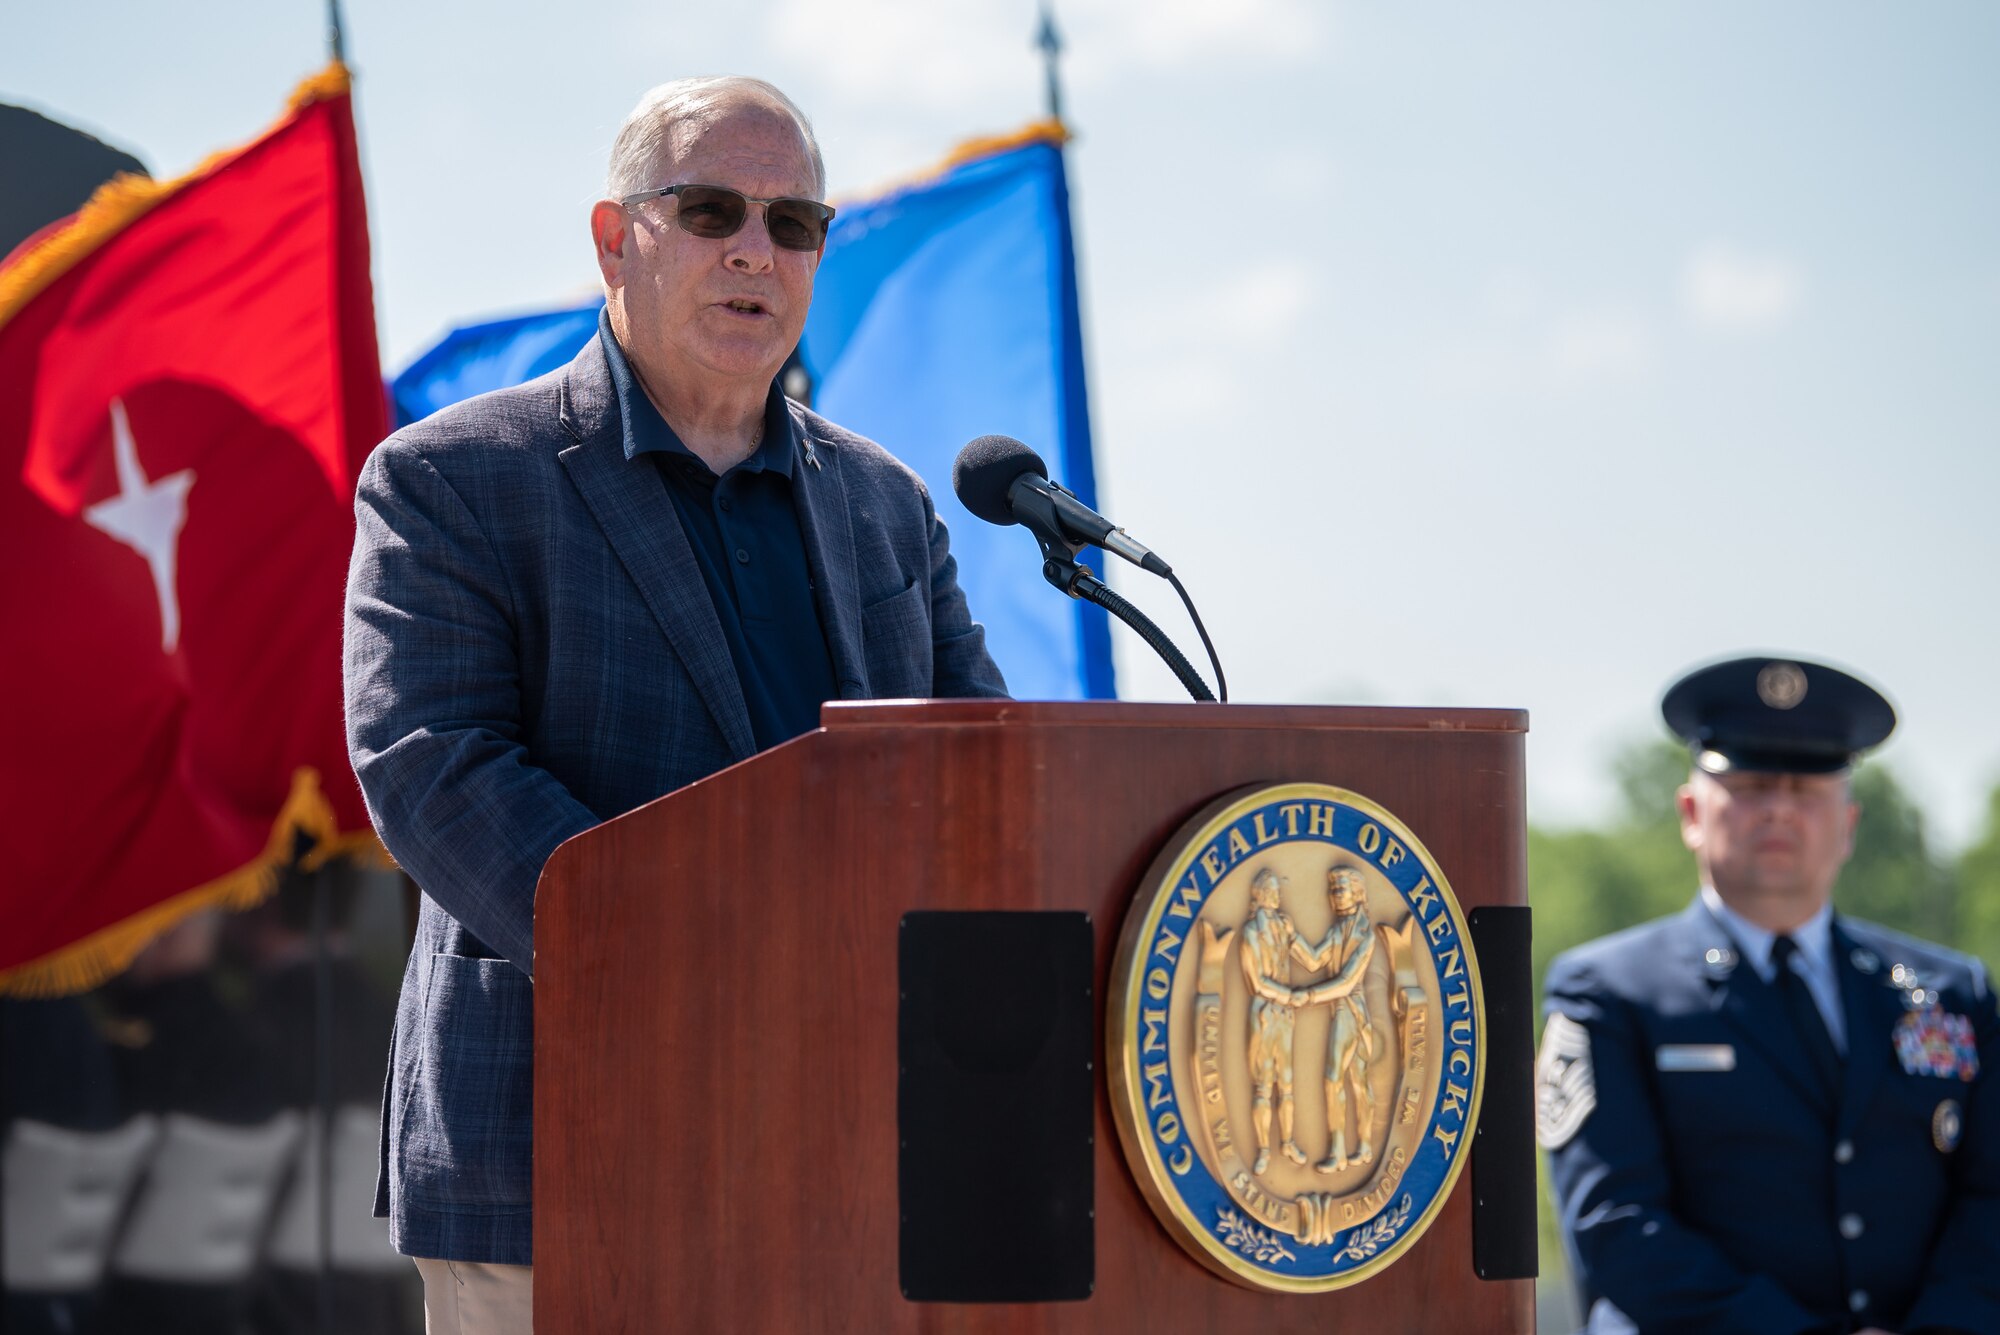 Army Brig. Gen. Benjamin F. Adams III (retired), former assistant adjutant general for Army and chairman of the Kentucky National Guard Memorial Fund Inc. reads the names of 13 fallen Soldiers who were added to the memorial this year during a ceremony at Boone National Guard Center in Frankfort, Ky., May 30, 2022. Of the 13 names being added, 11 were killed during World War I, one in 1935 during weekend training, and another in 2001 just prior to 9/11. The monument now honors 286 Soldiers and Airmen from the Kentucky Guard who have paid the ultimate price for freedom since 1912. (U.S. Air National Guard photo by Dale Greer)